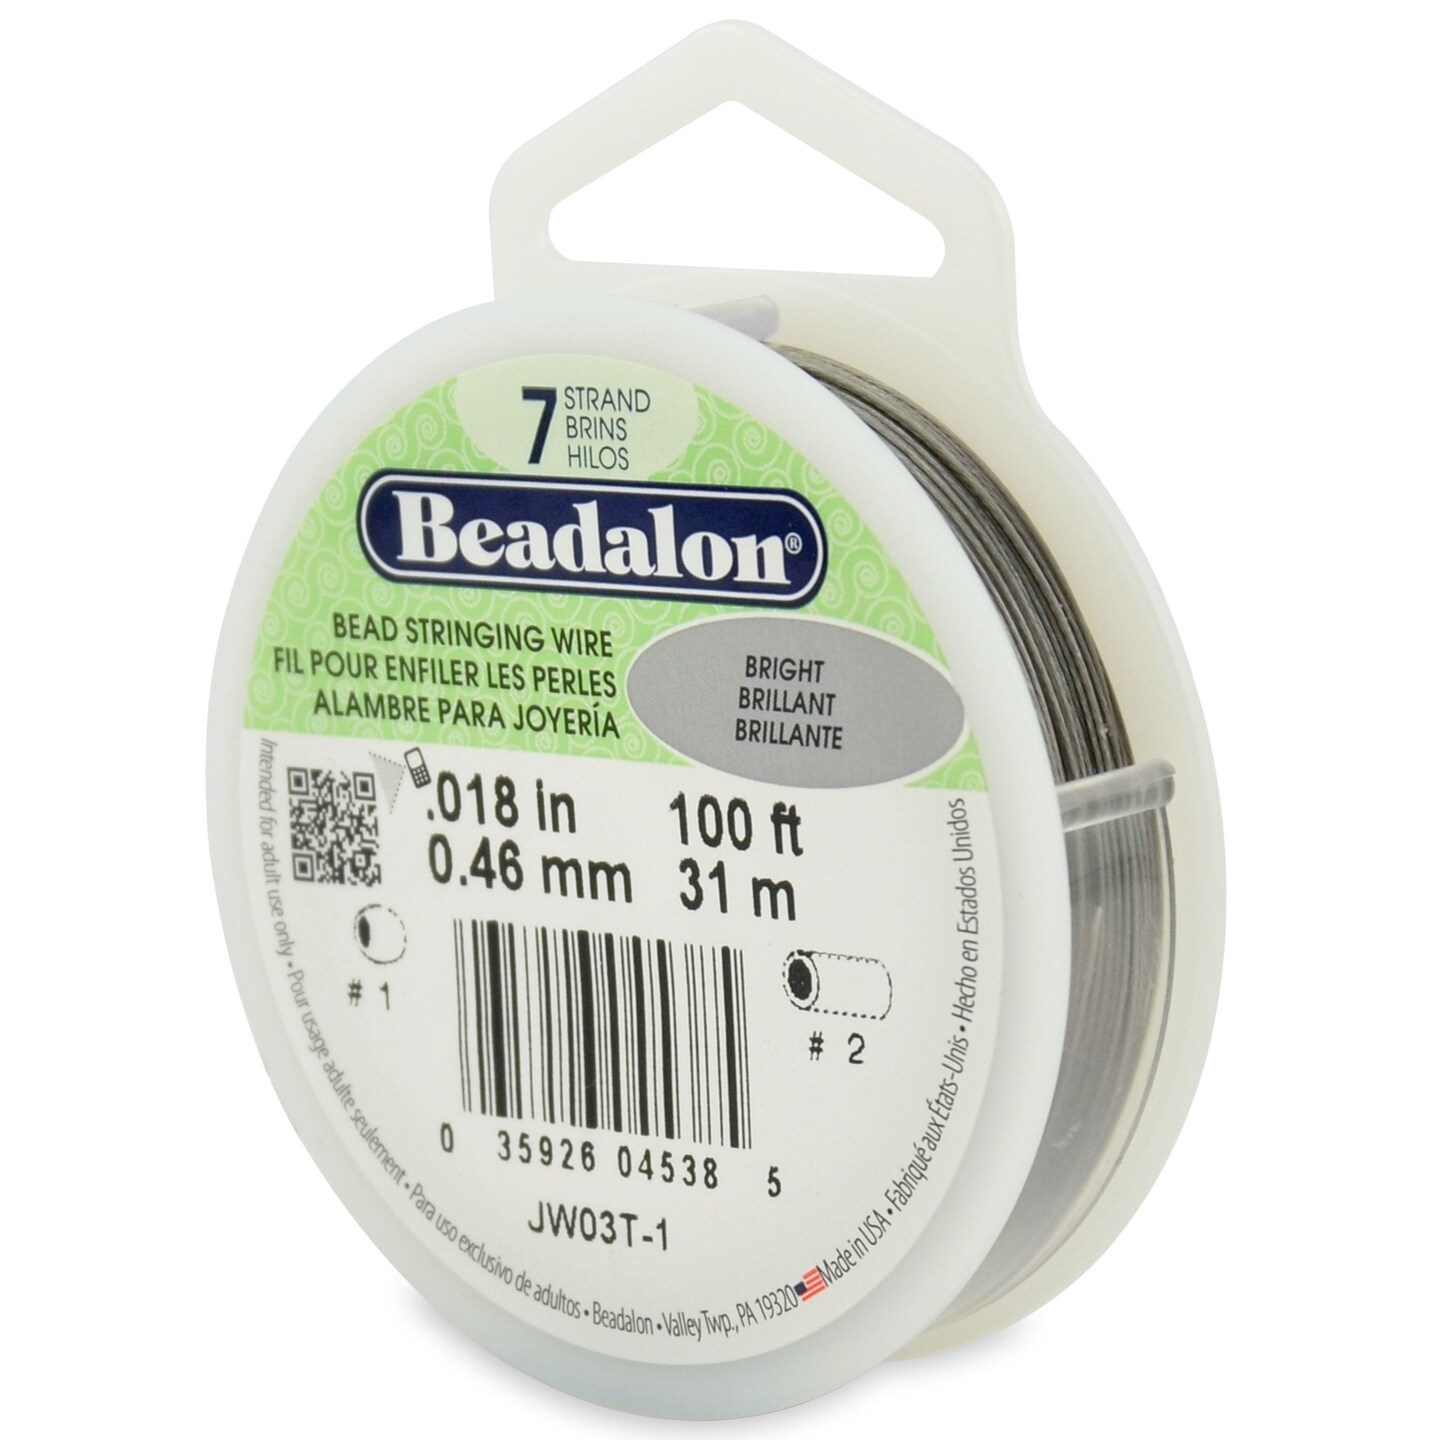 Beadalon 7 Strand Stainless Steel Bead Stringing Wire, 018 in / 0.46 mm,  Bright, 30 ft / 9.2 m